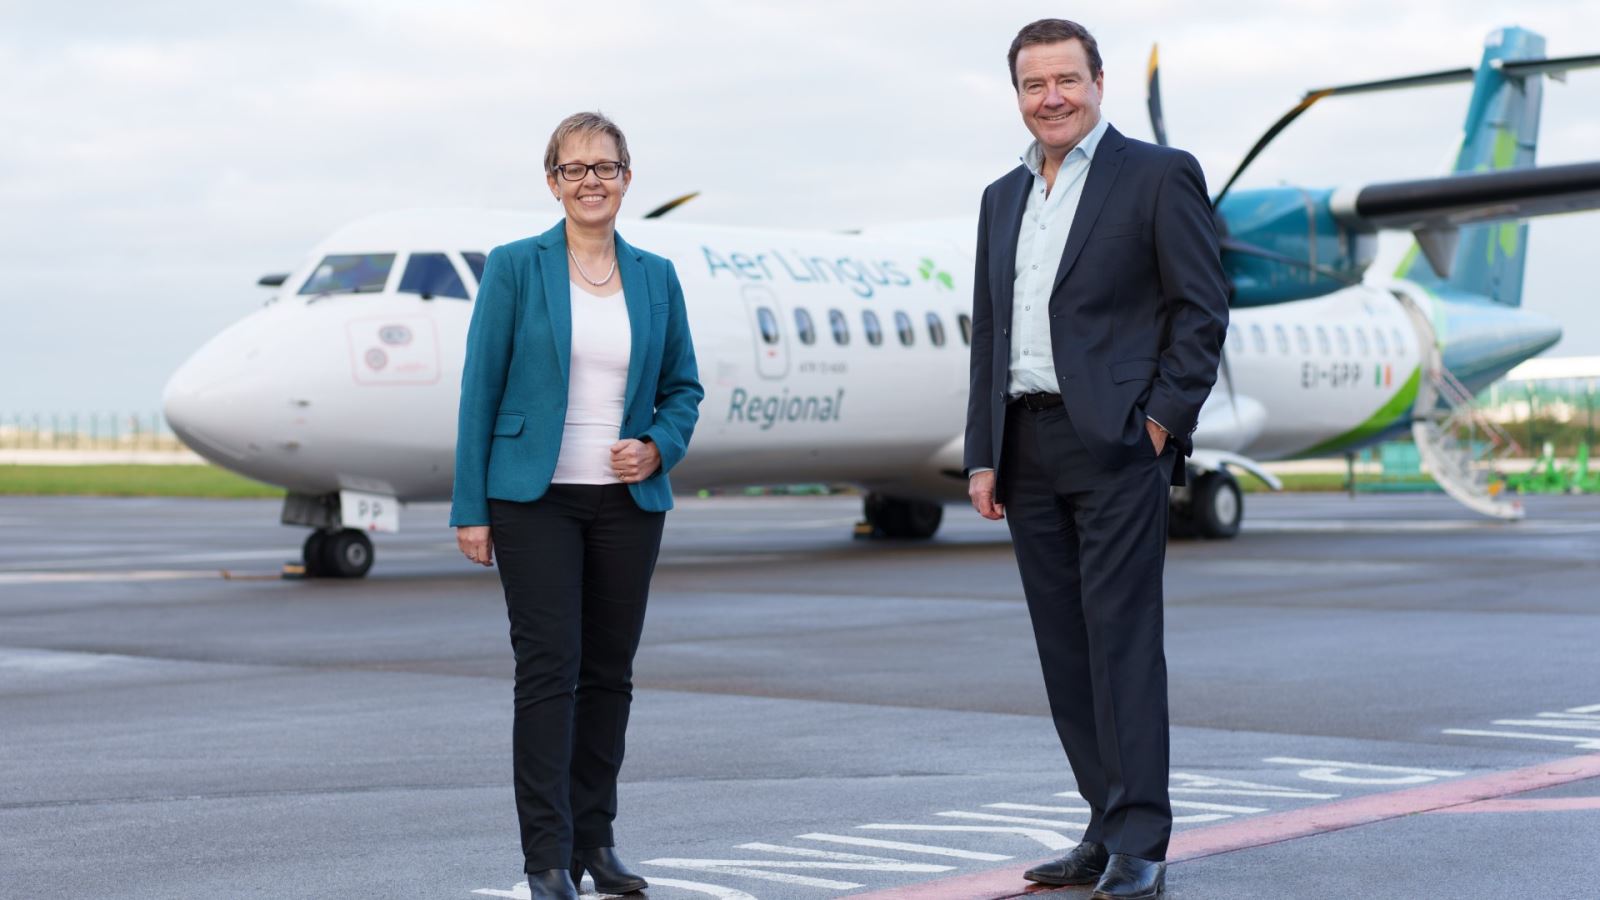 Pictured is Aer Lingus CEO Lynne Embleton with Emerald Airlines CEO Conor McCarthy, at the announcement of the commencement of Aer Lingus Regional flights, with tickets on sale from today. The flights, operated under a franchise agreement by Emerald Airlines on behalf of Aer Lingus, will commence on 17th March with over 340 flights per week across 11 routes with fares starting at €29.99 one way. The services will greatly increase connectivity between the UK, Ireland and the US, and catalyses Aer Lingus’ strategy to expand Dublin Airport as a hub airport. Further route announcements will be made in the coming weeks. Customers can book at aerlingus.com